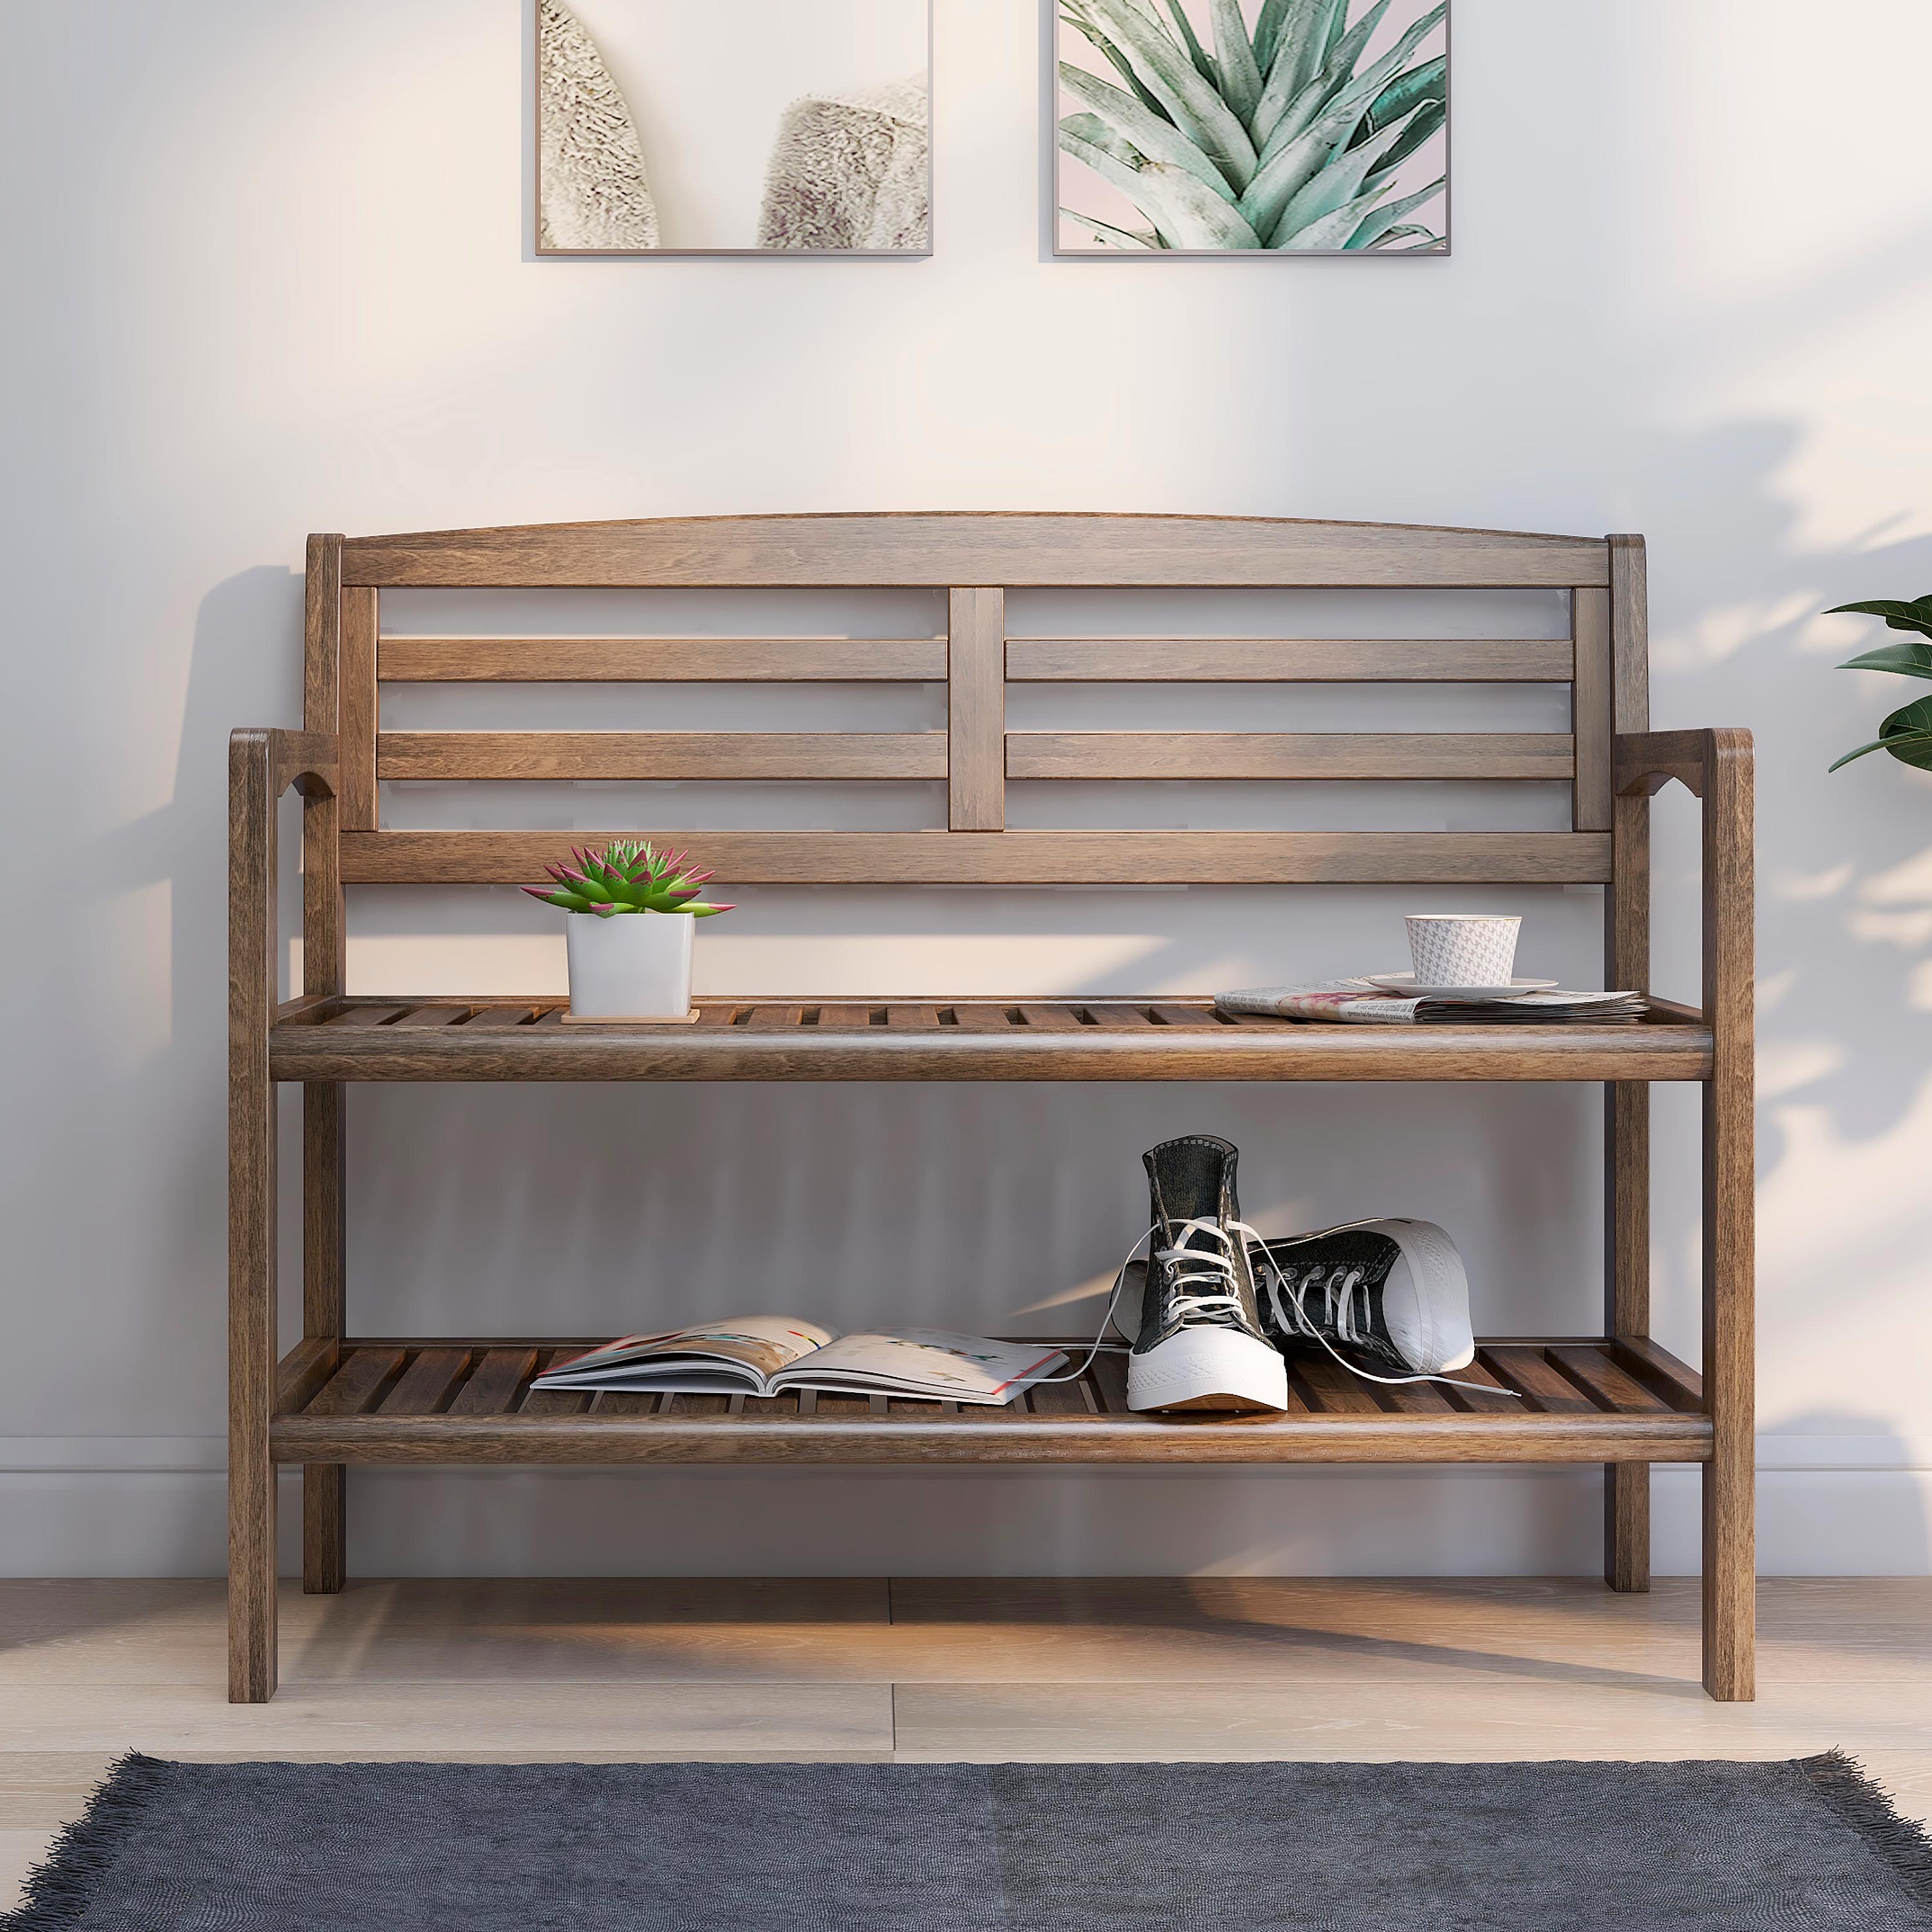 Wooden Entryway Bench